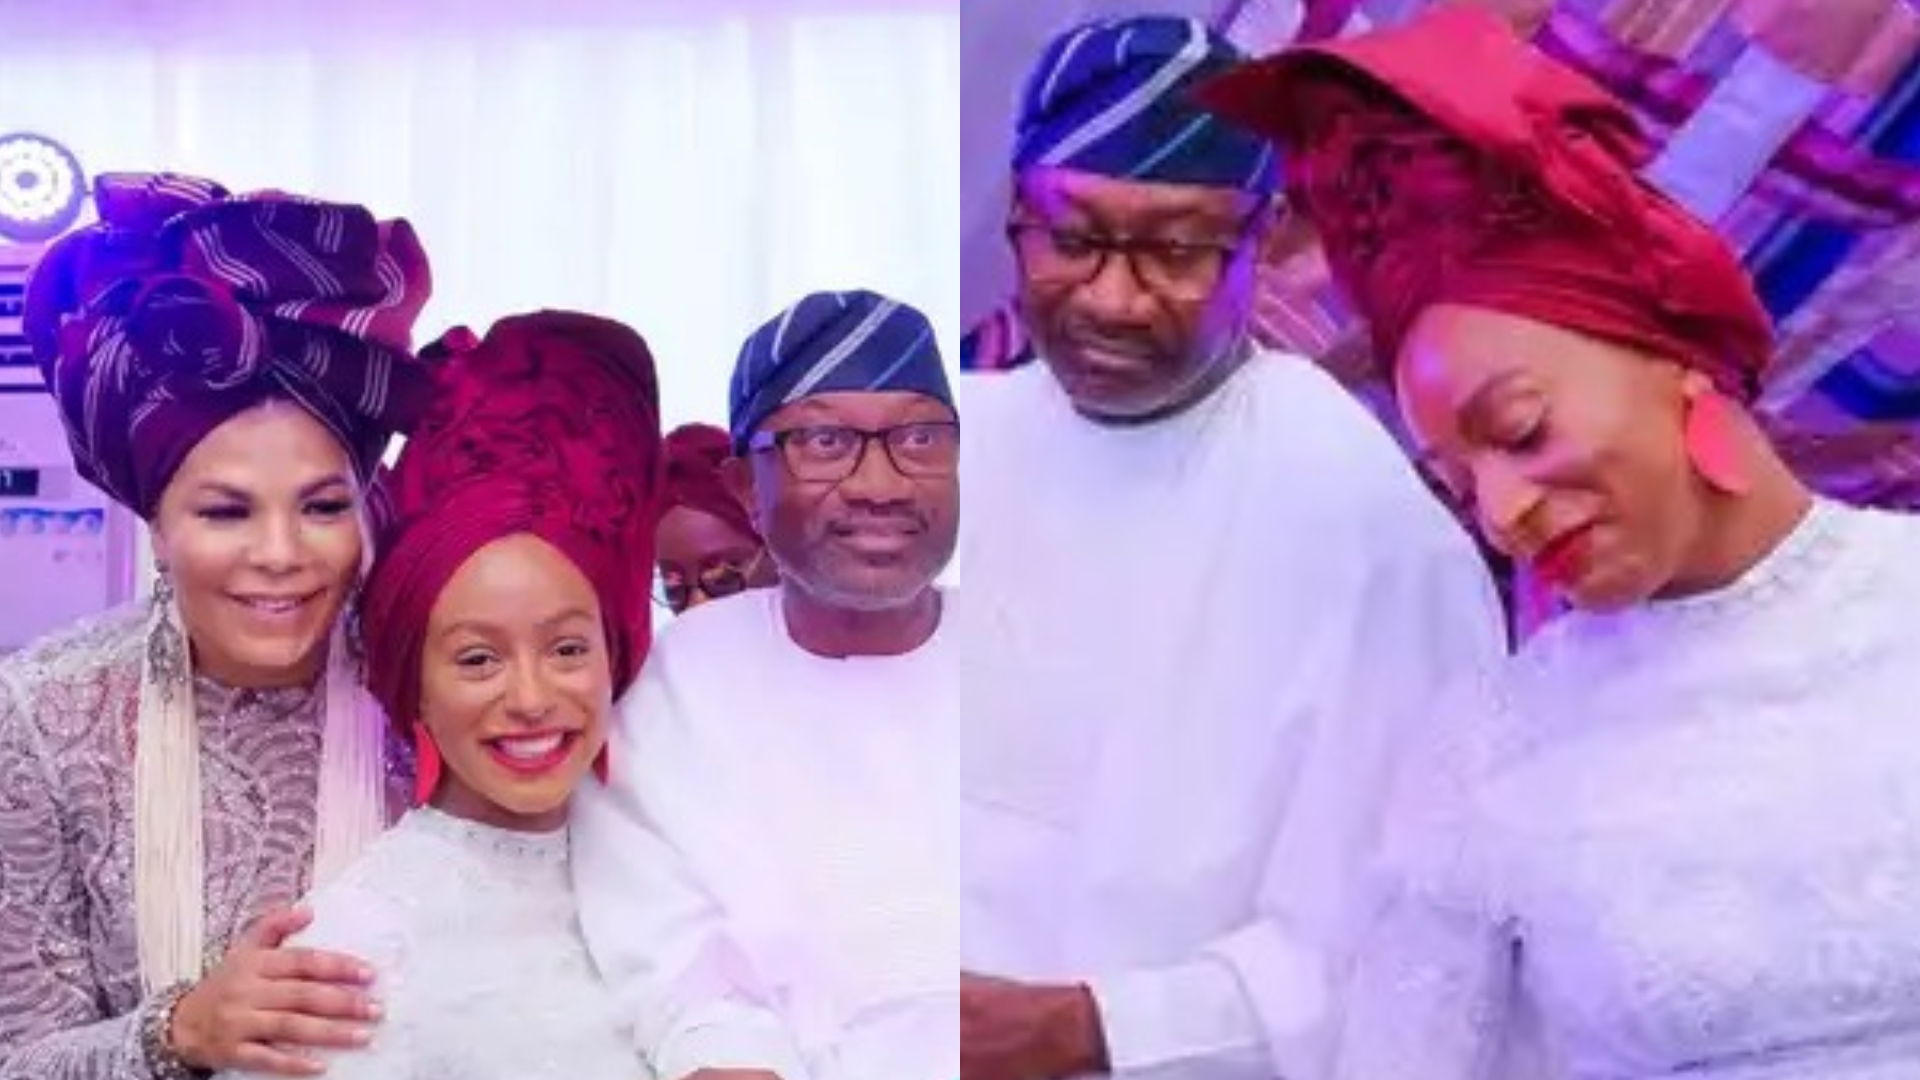 Femi Otedola, Cuppy with whole family celebrate during Grandma’s burial [Video]